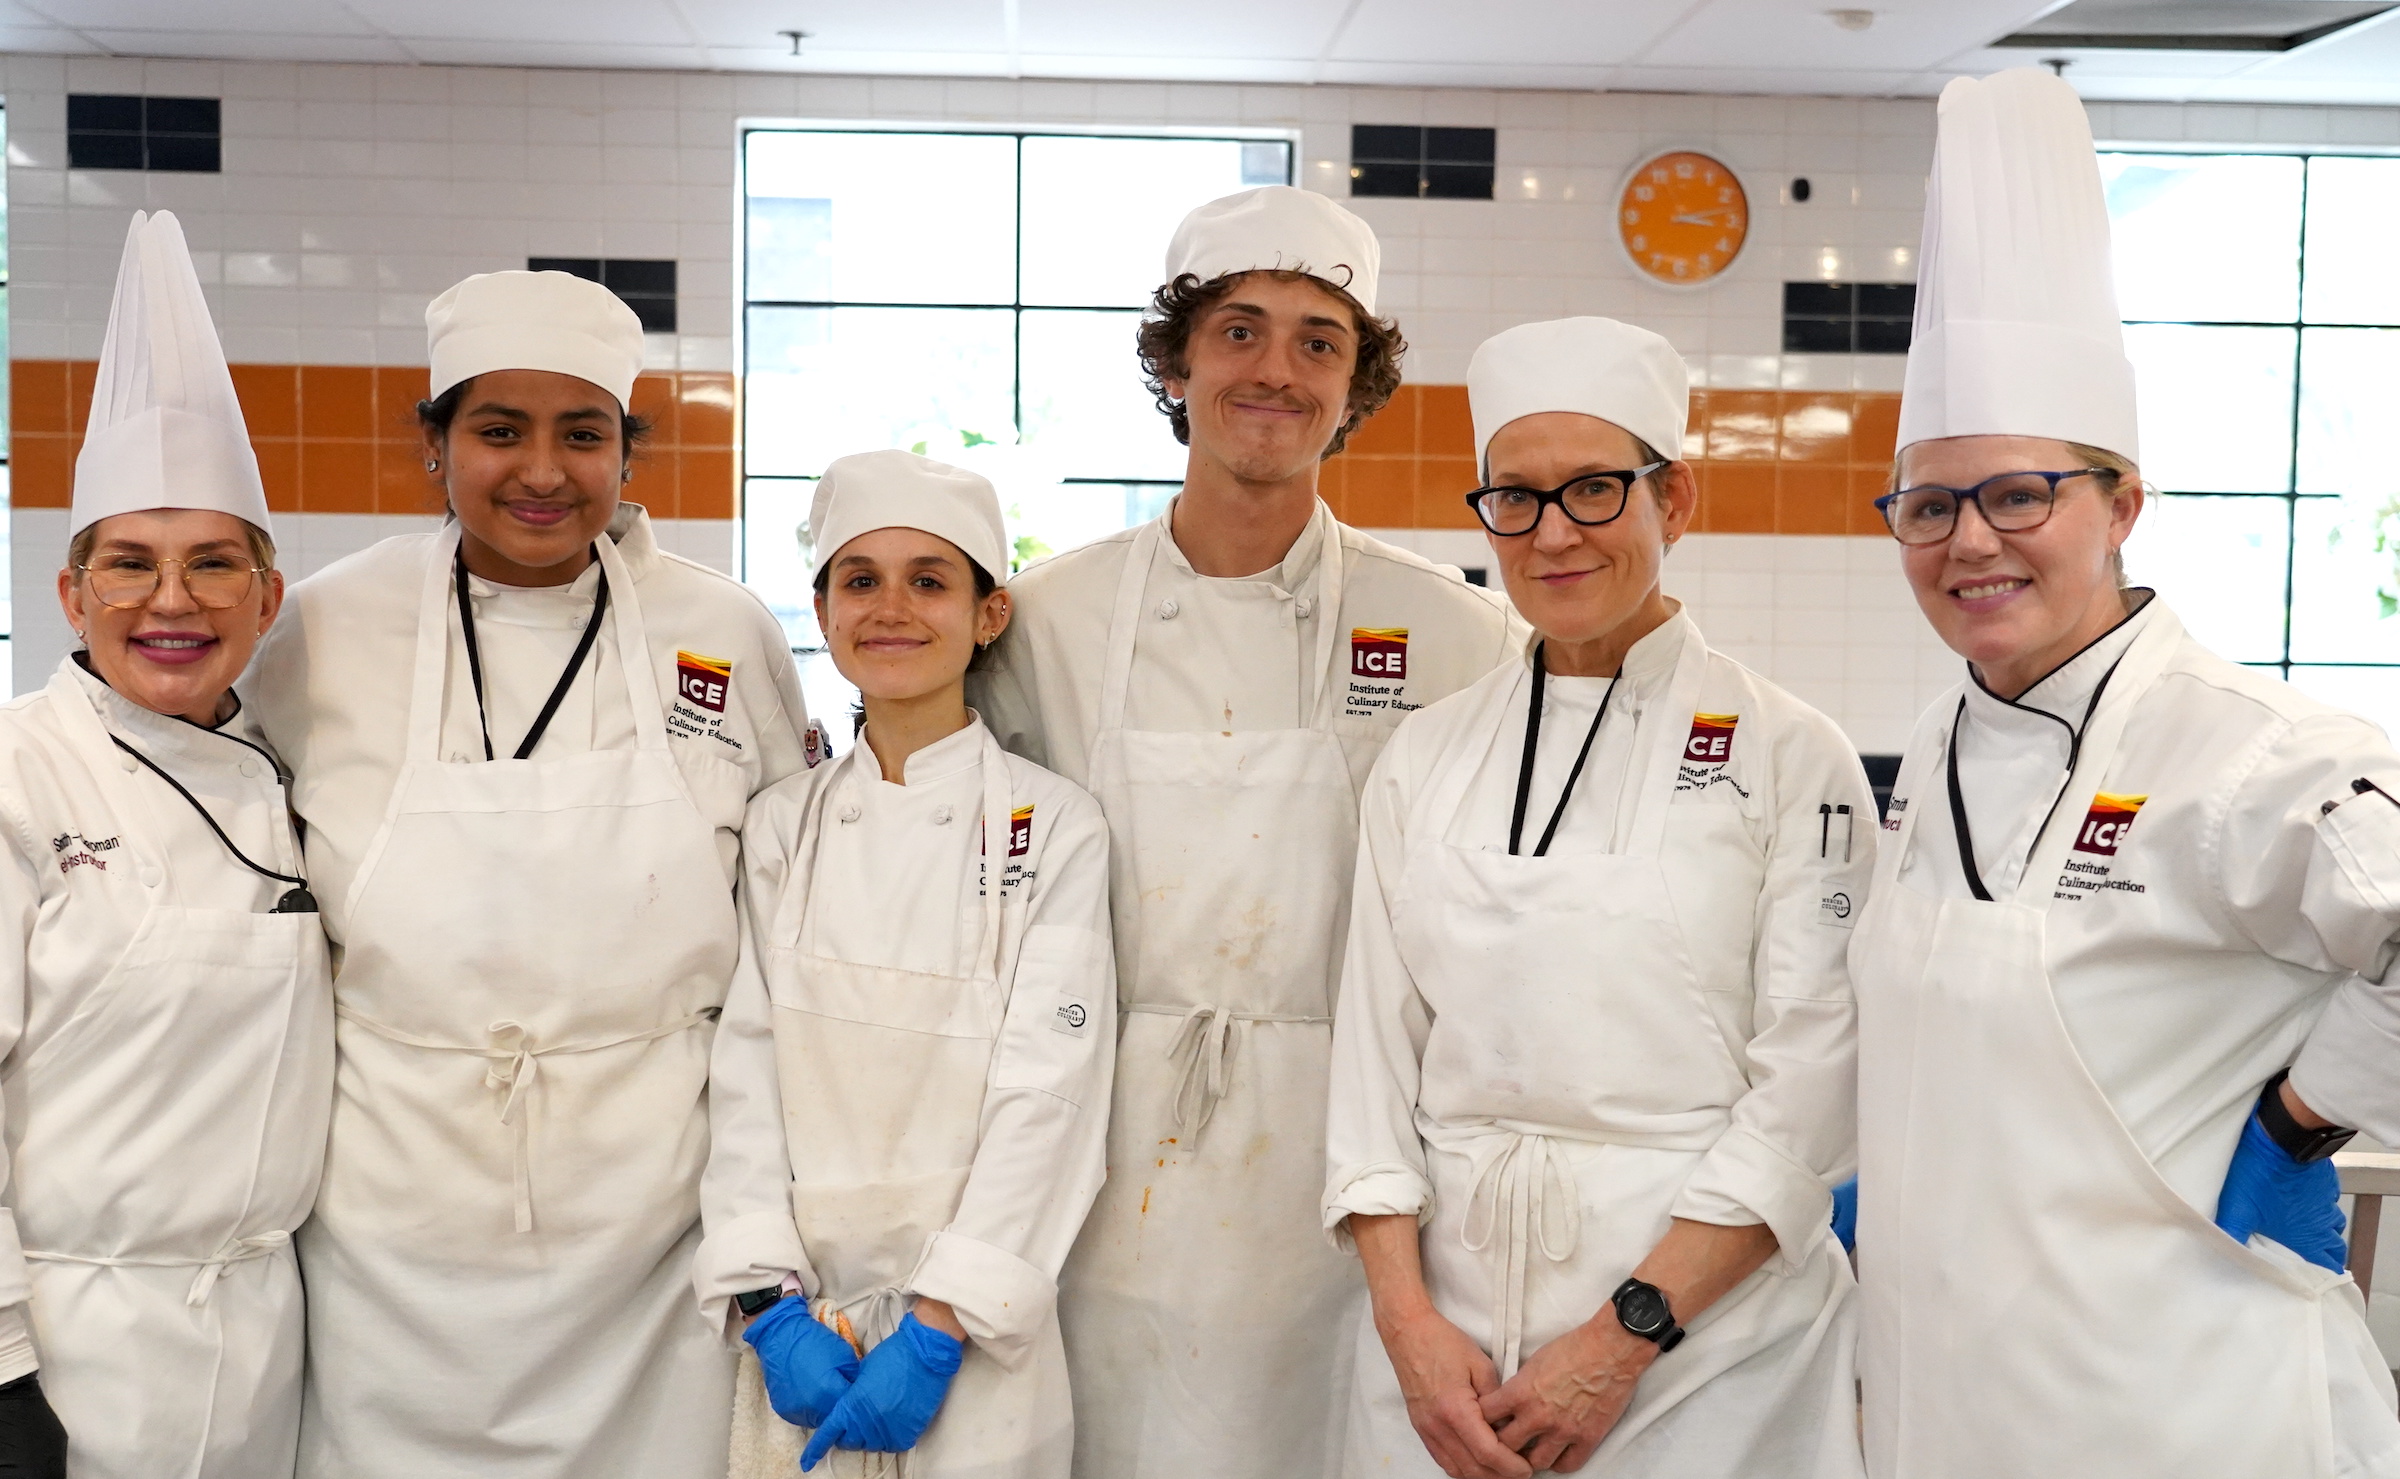 The Plant-Based Culinary Arts students and Chef-Instructors stand in a group, smiling